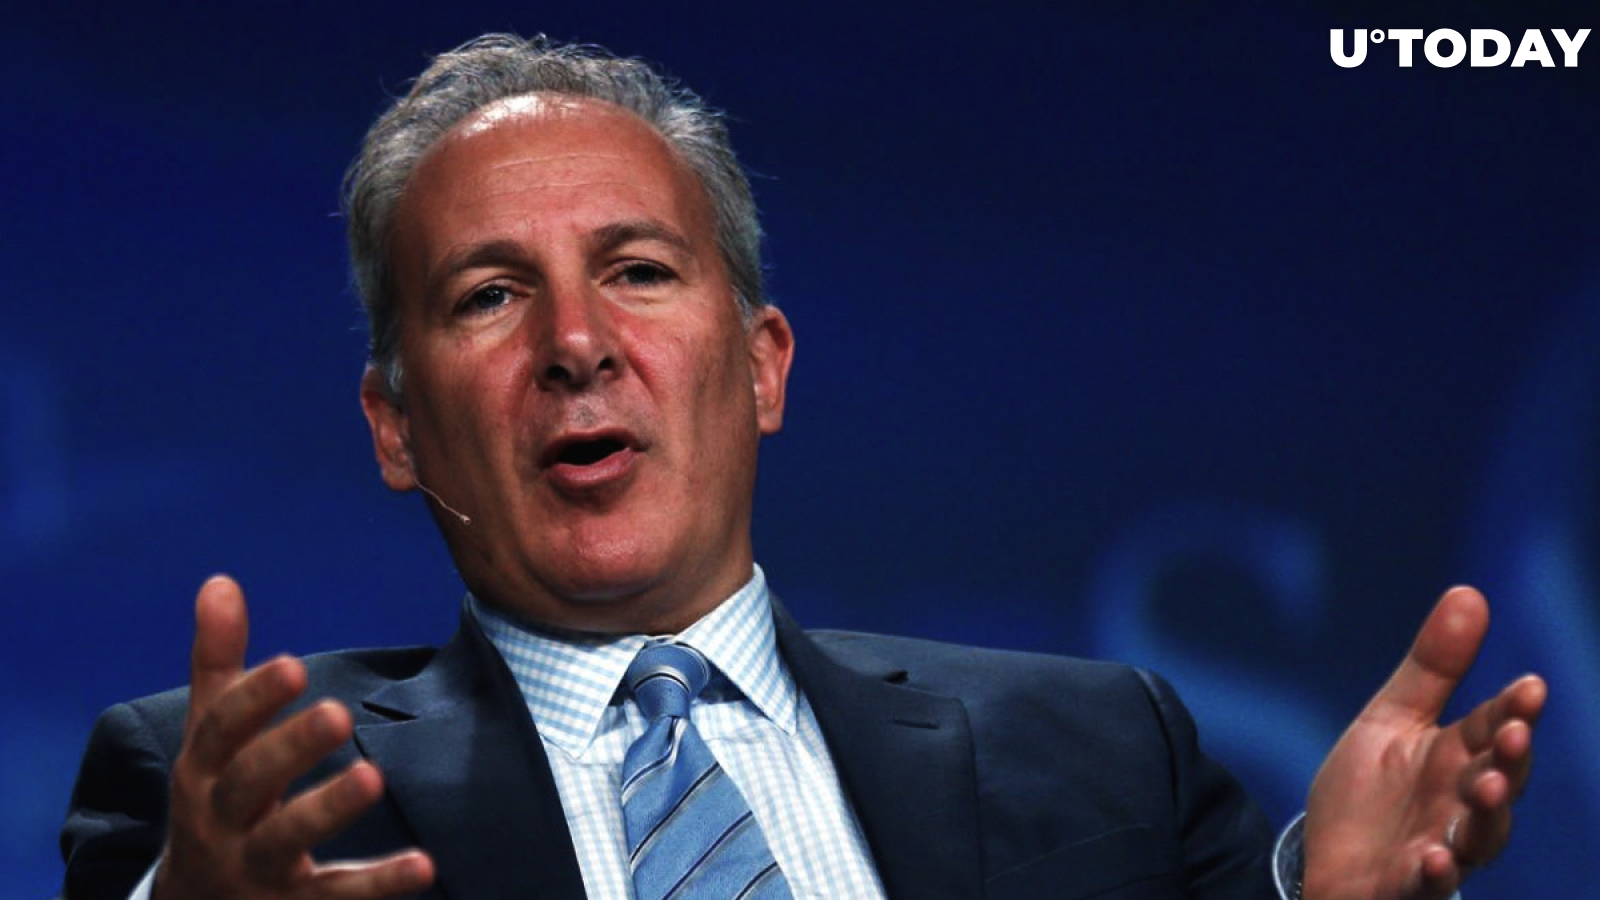 Peter Schiff Again Tweets Why Bitcoin (BTC) Does Not Protect from Inflation